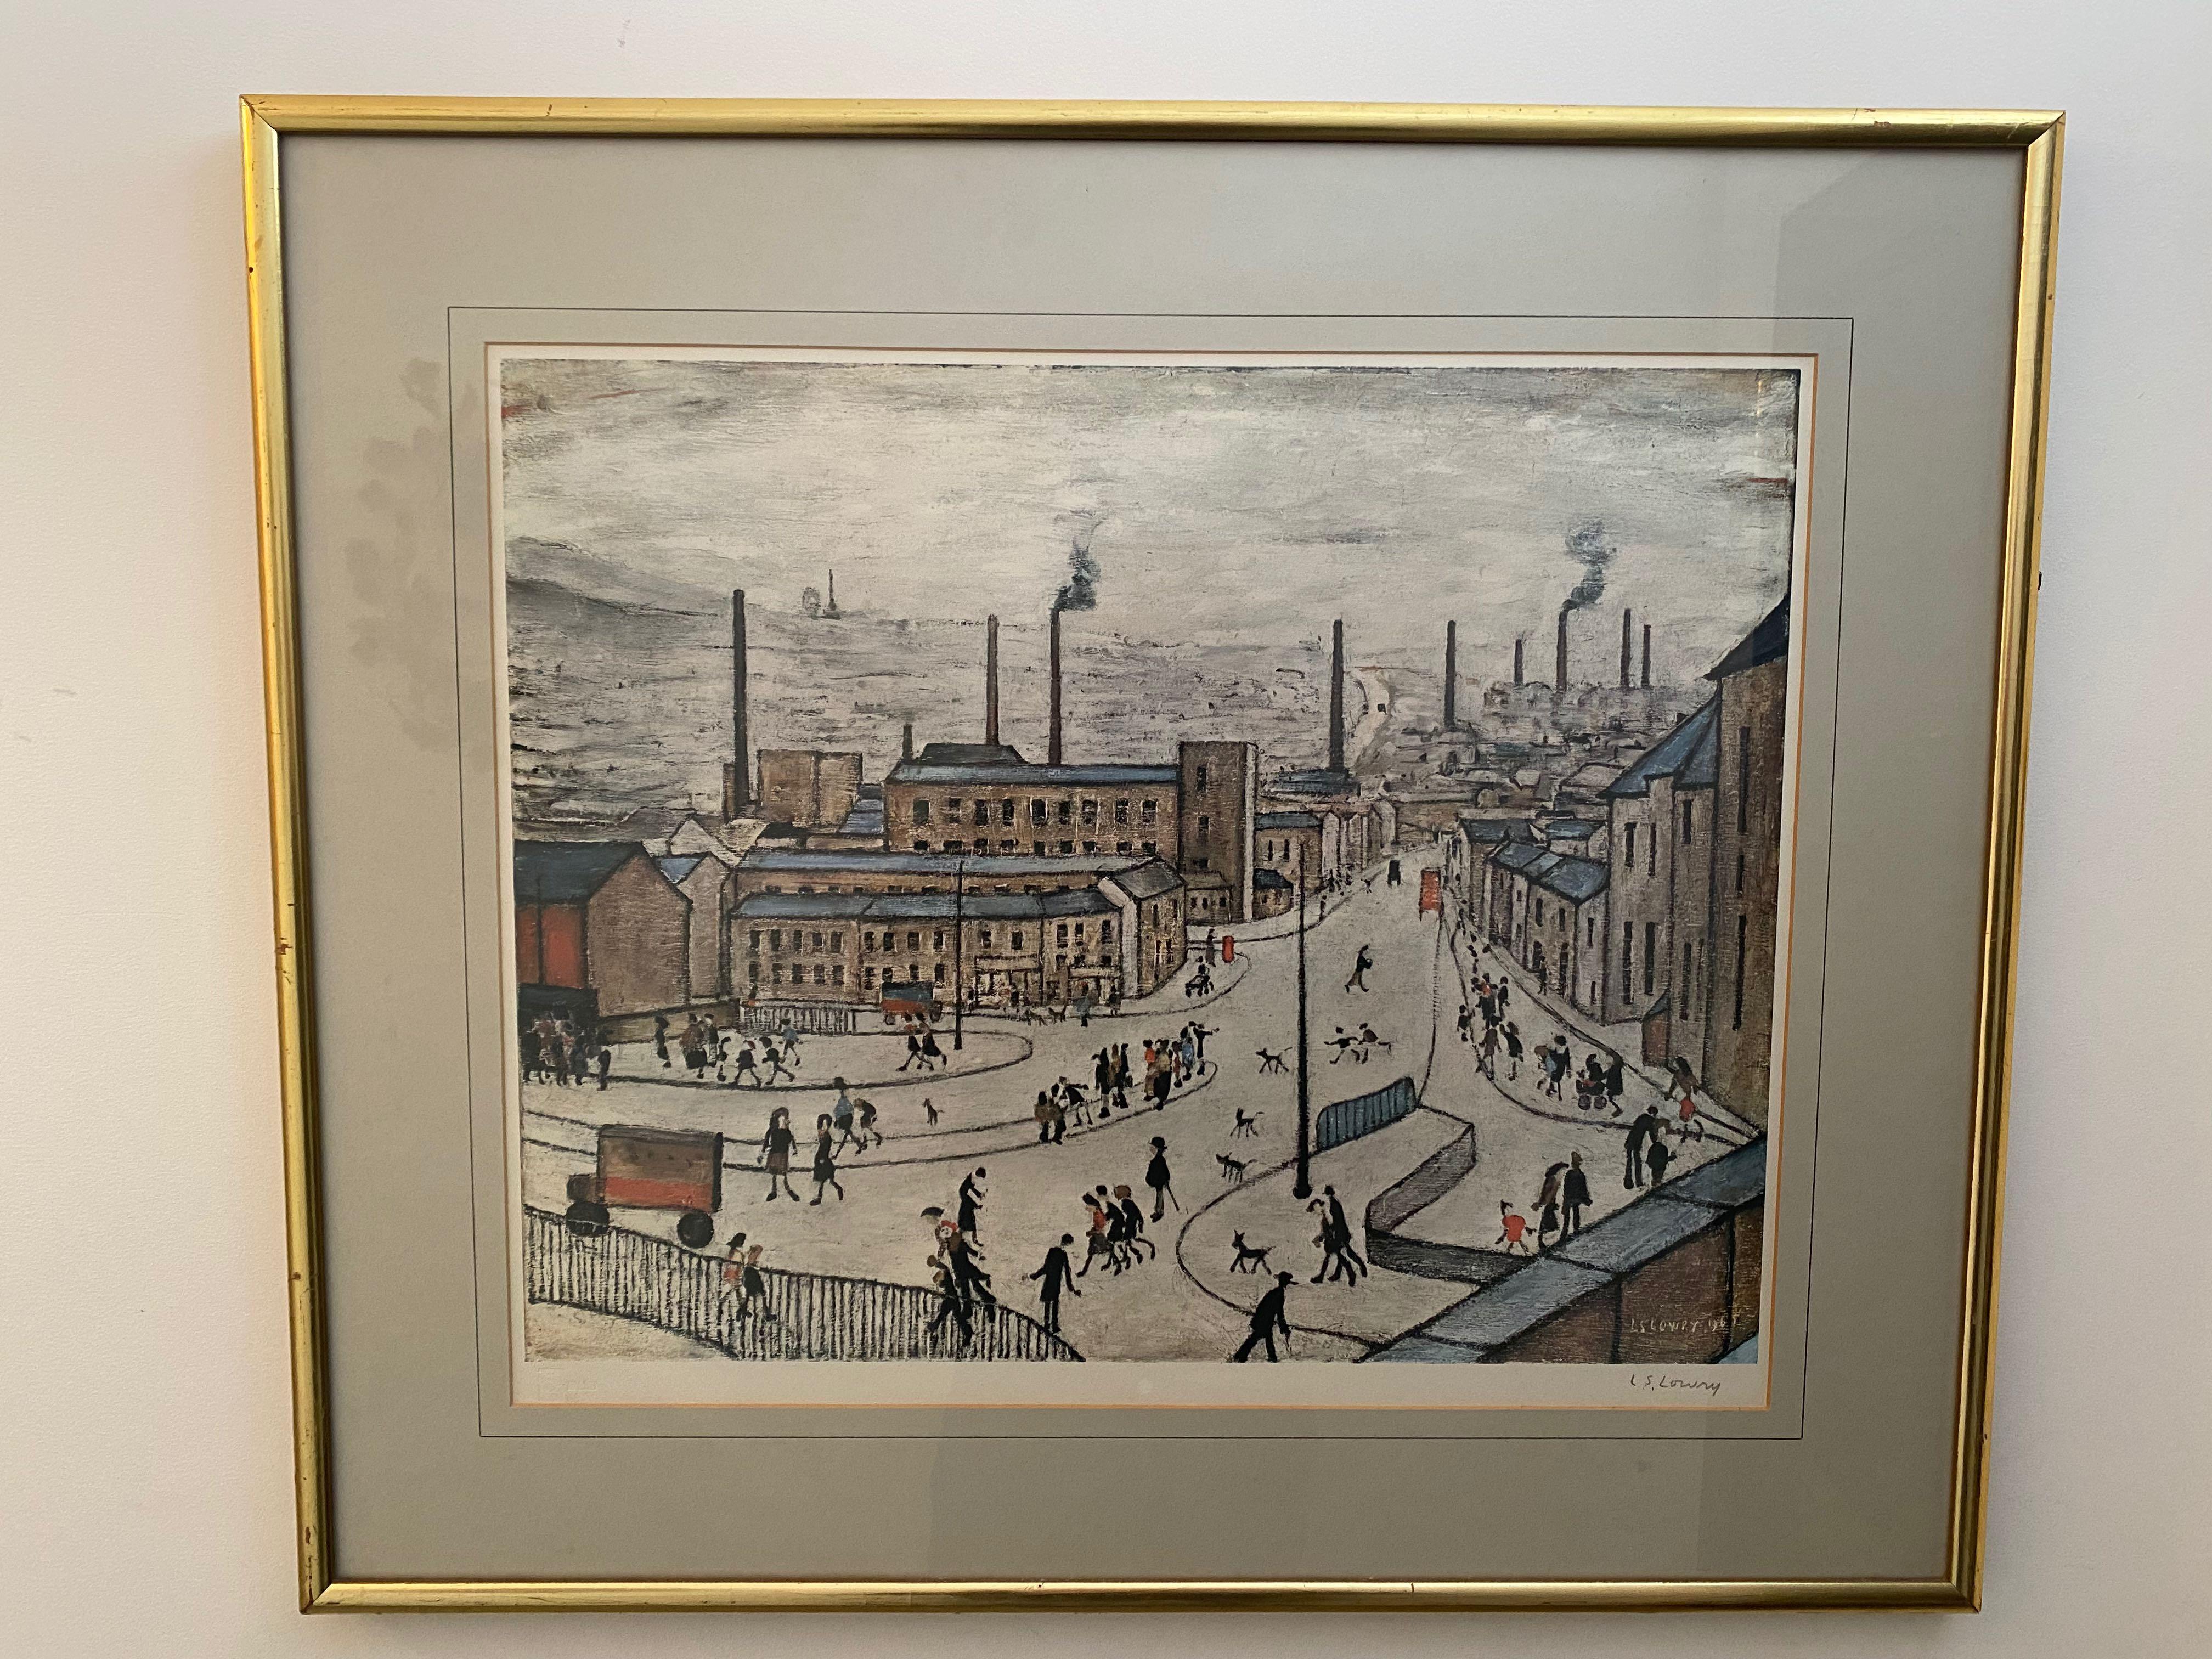 Huddersfield 1973

By Laurence Stephen Lowry RA (1887-1976)

Offset lithograph printed in colours on wove paper

Signed to the right in pencil

Edition of 850

Image size 46 x 57 cm

The Fine Art Trade Guild stamp to the bottom